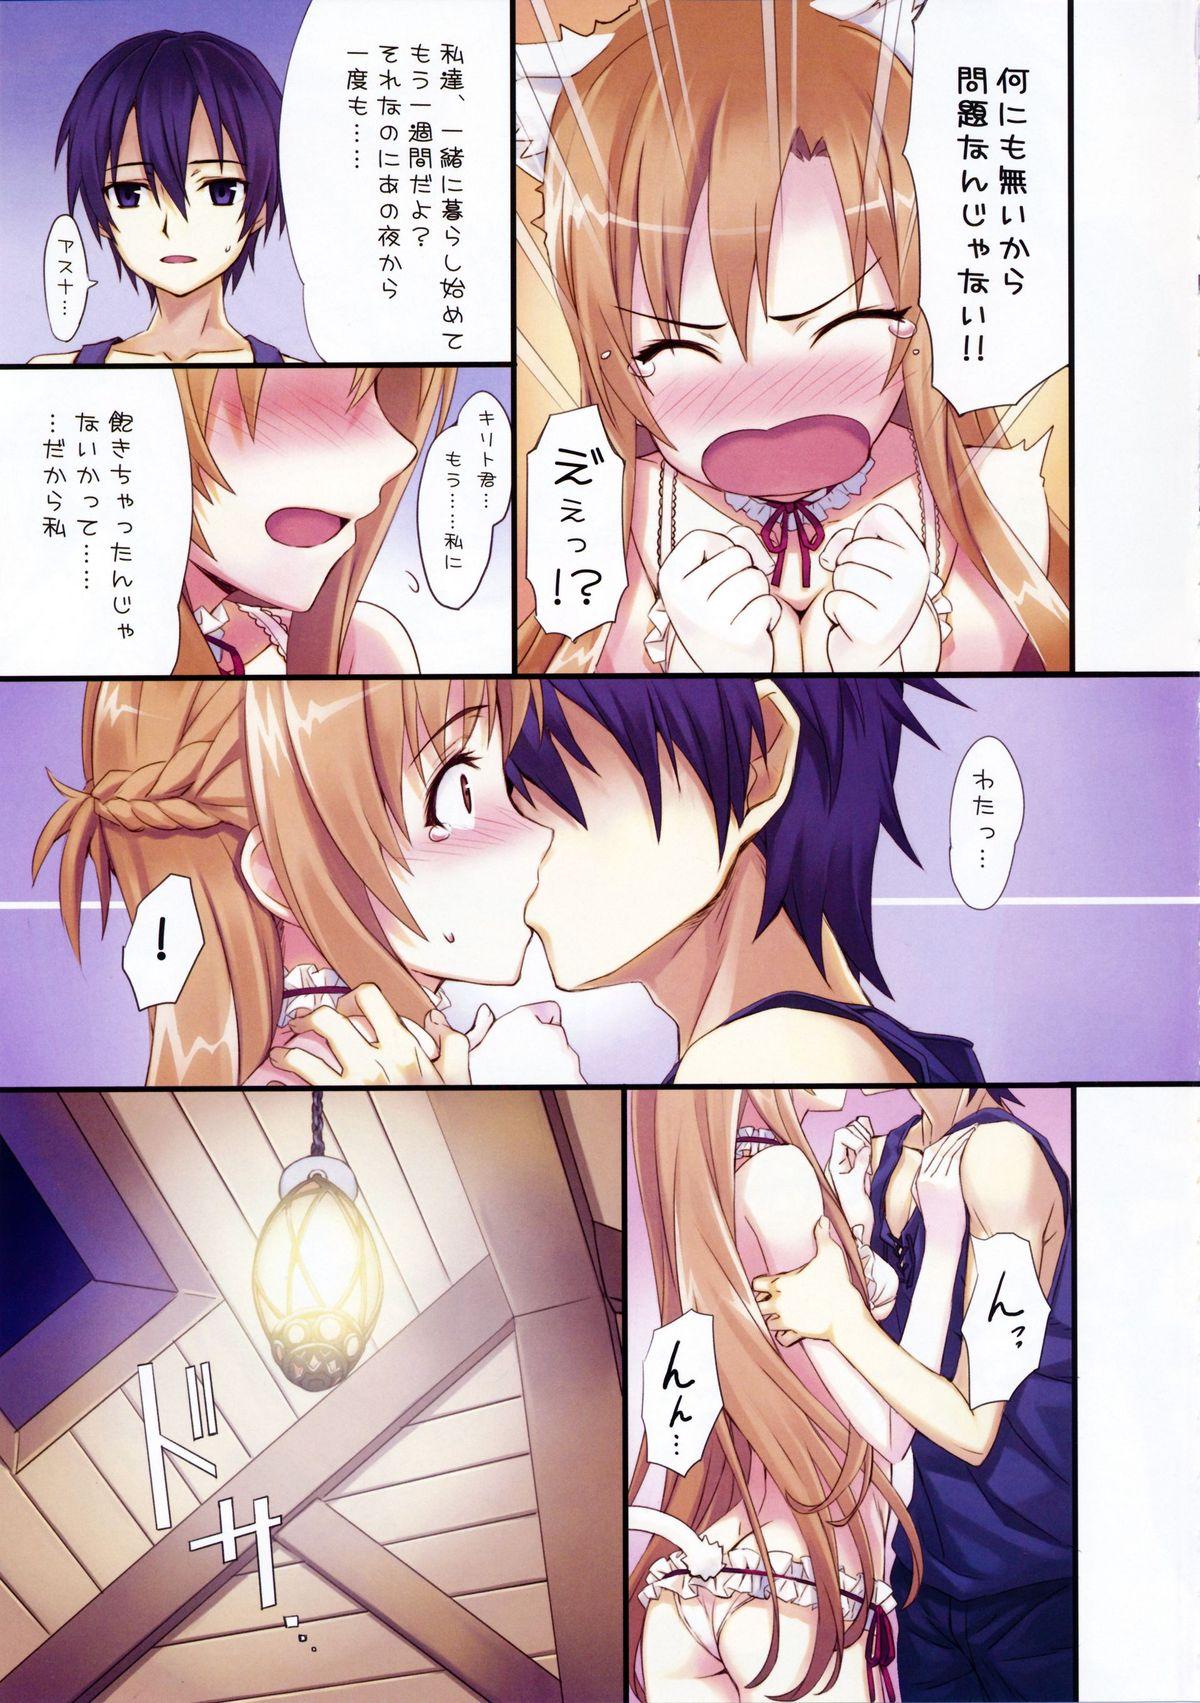 Hard Core Porn Sword Art Extra - Sword art online Licking Pussy - Page 6